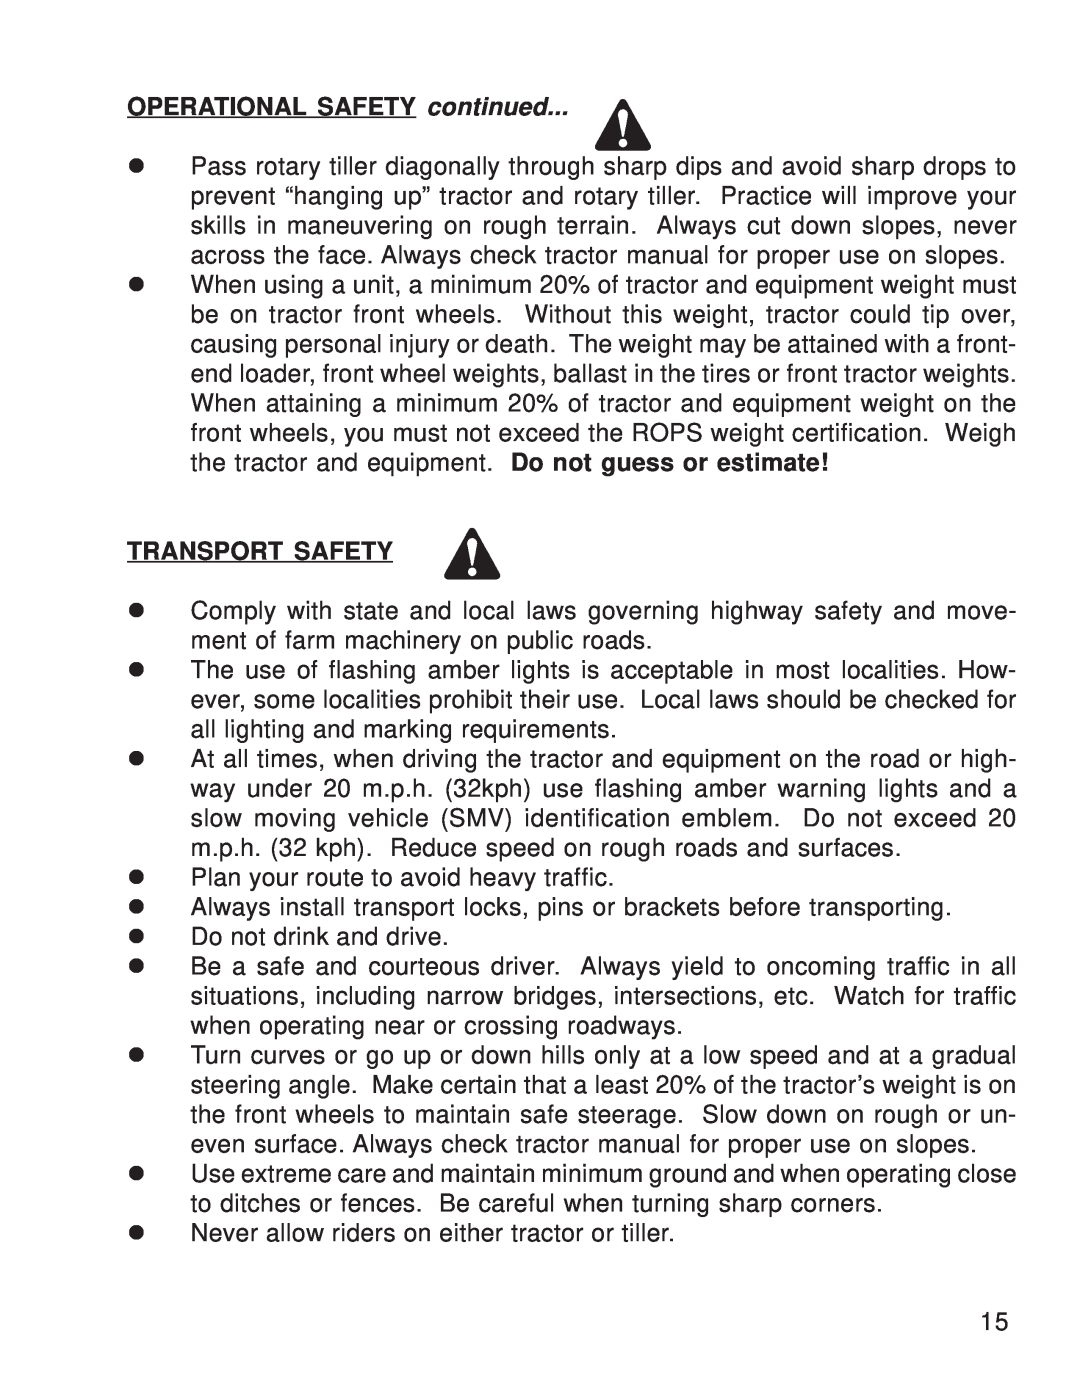 King Kutter 999995 manual OPERATIONAL SAFETYcontinued, Transport Safety 